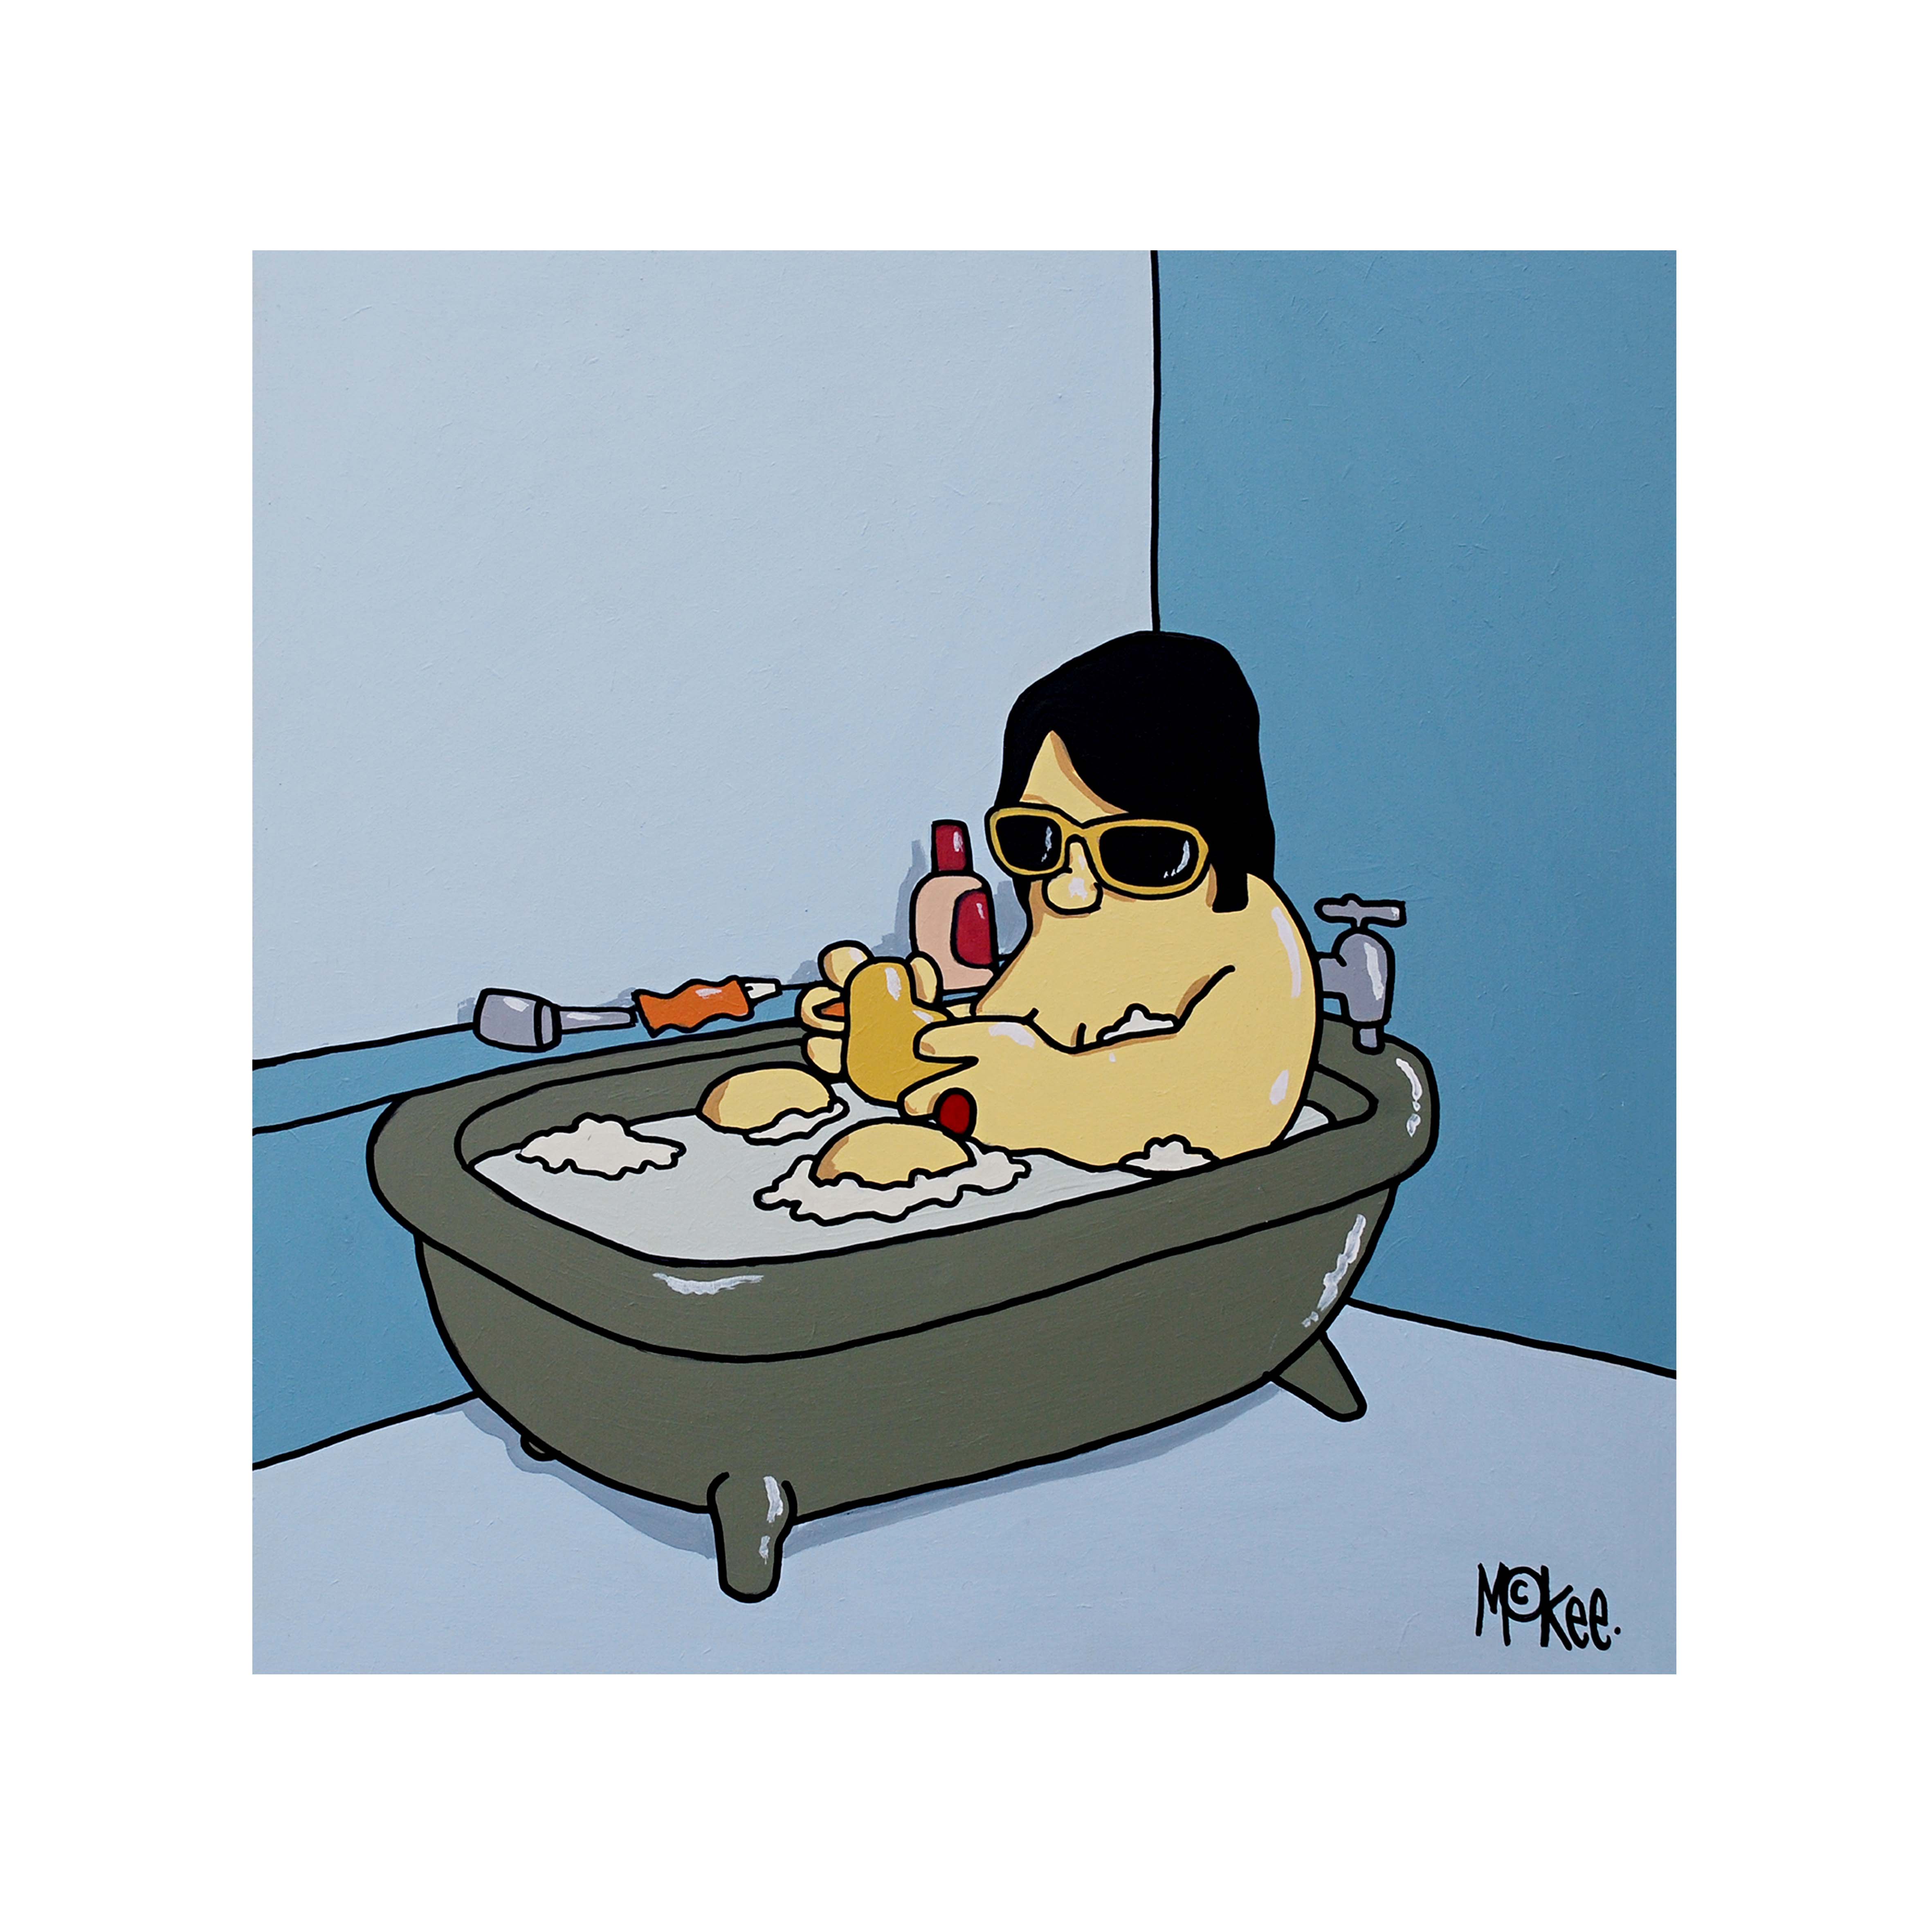 At Home With Elvis - Bath Time